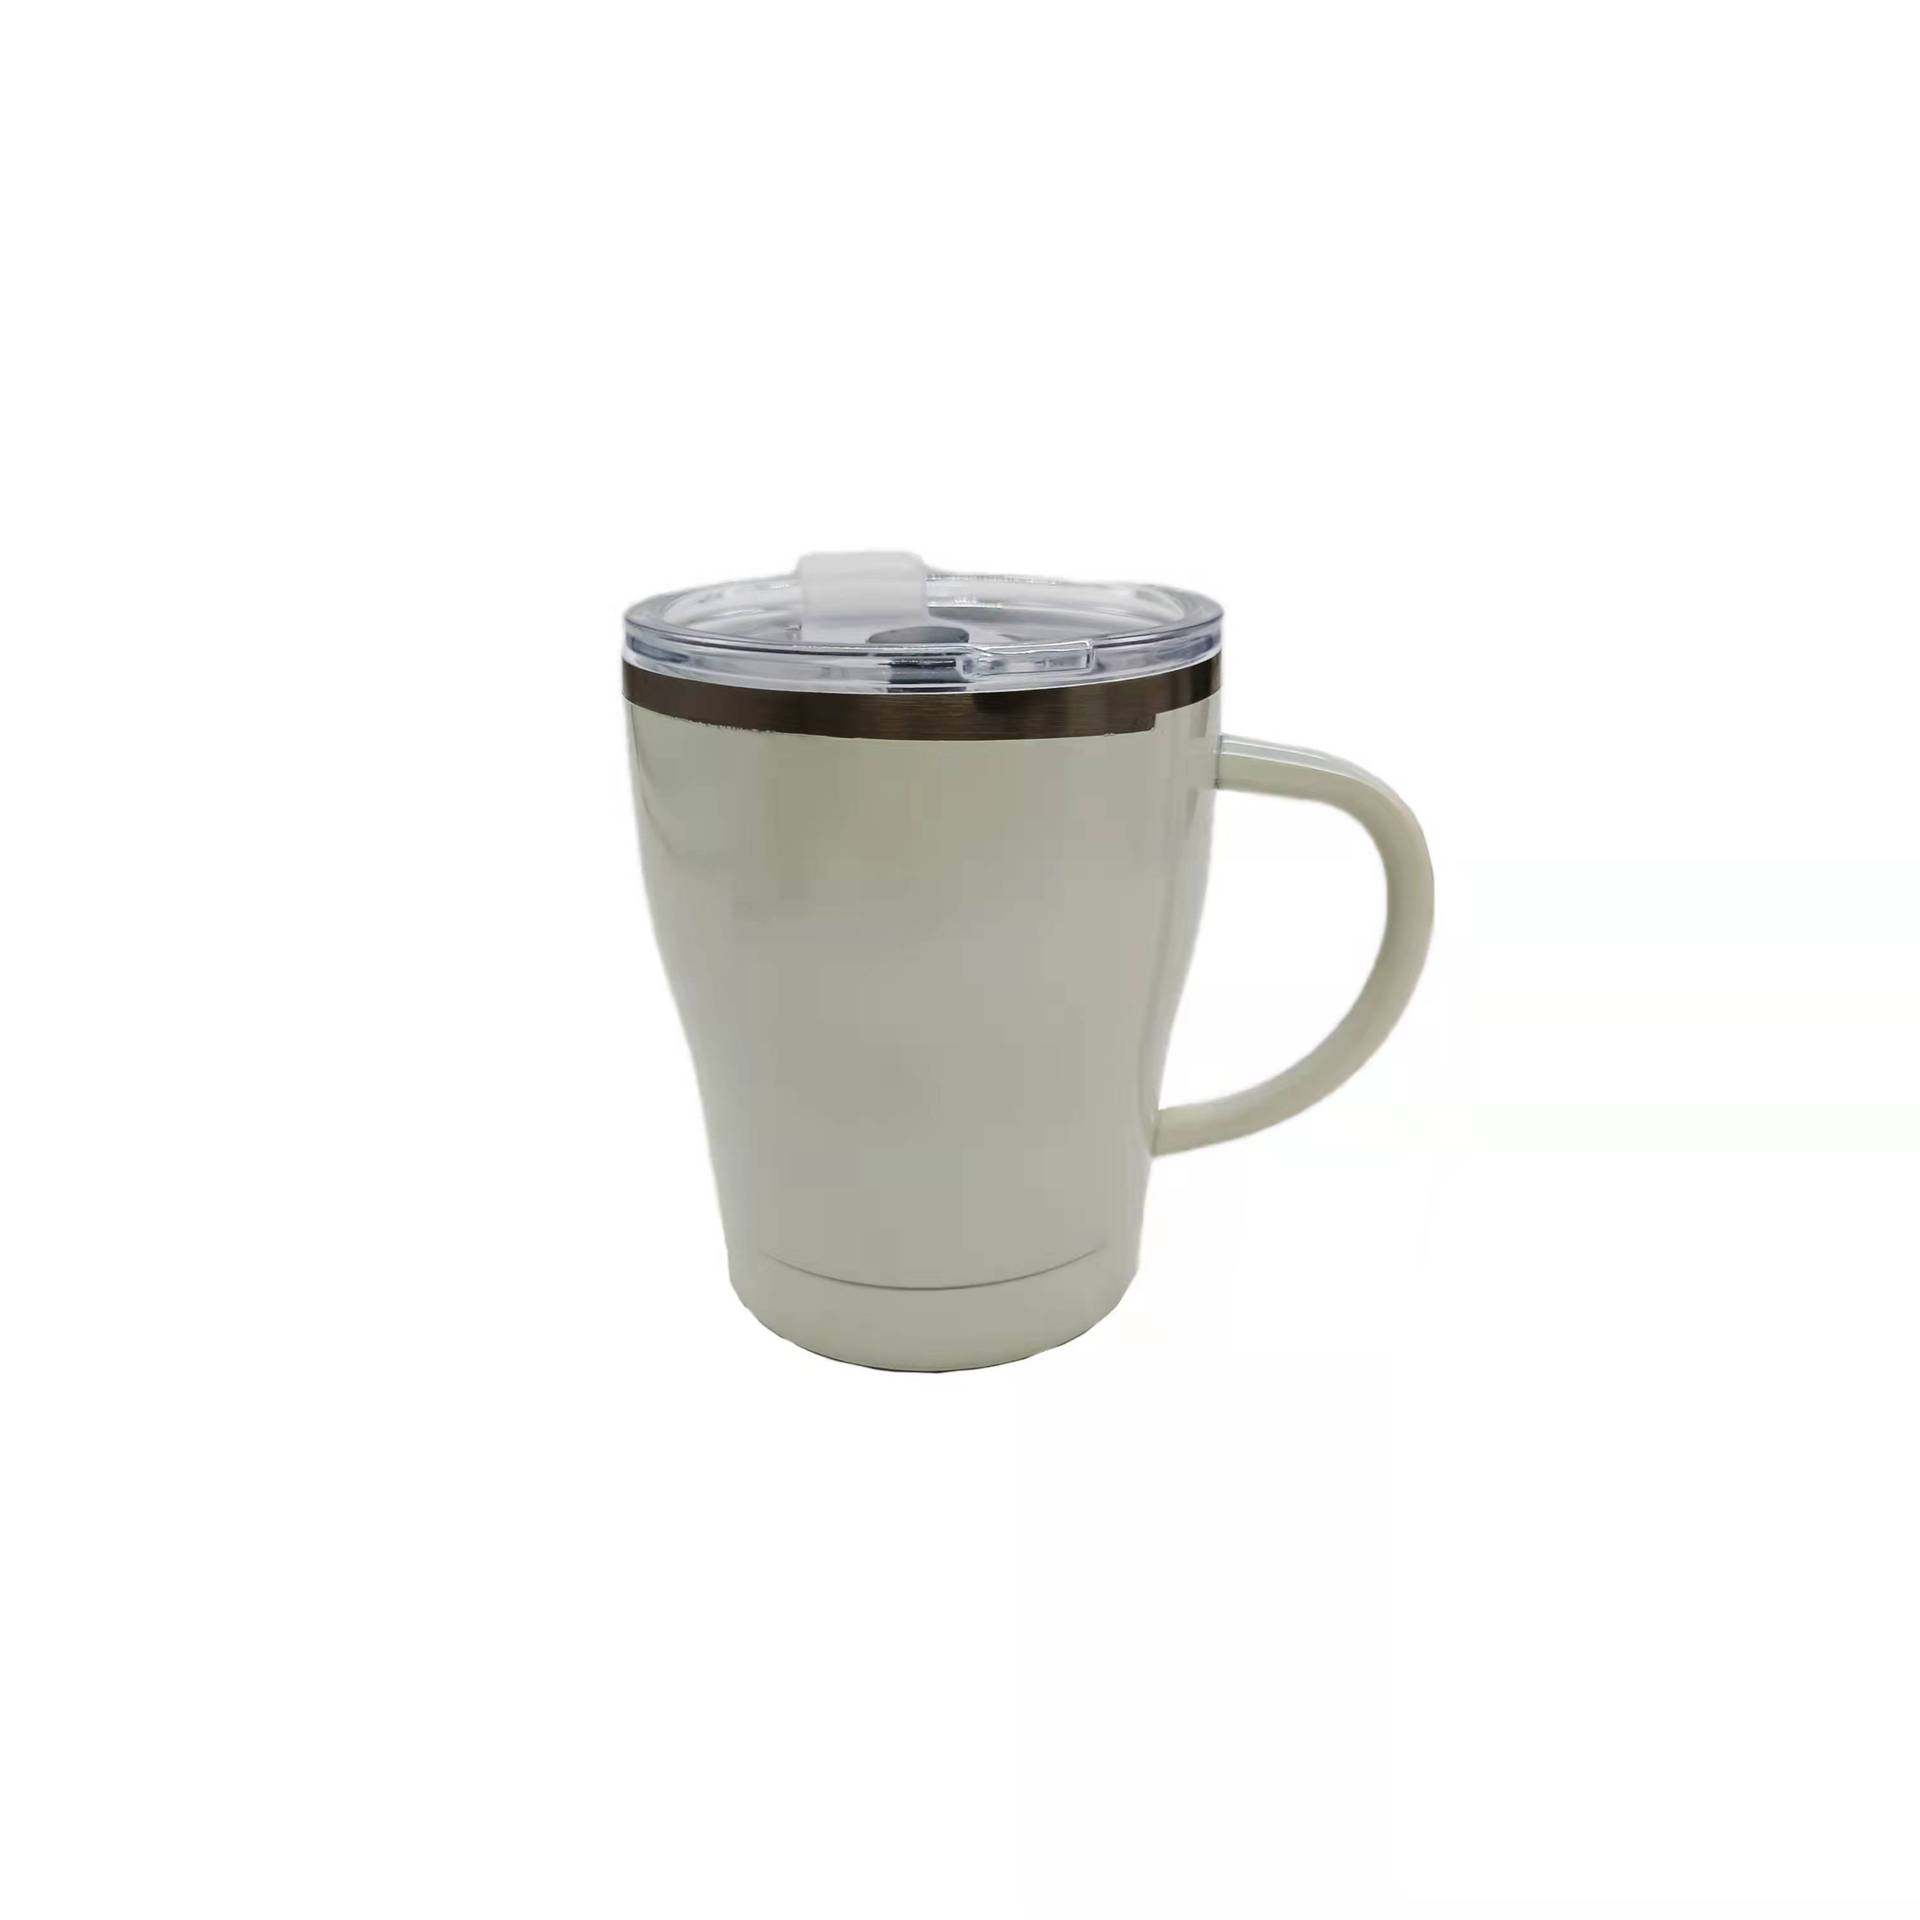 Stainless steel coffee cup with handle|12oz